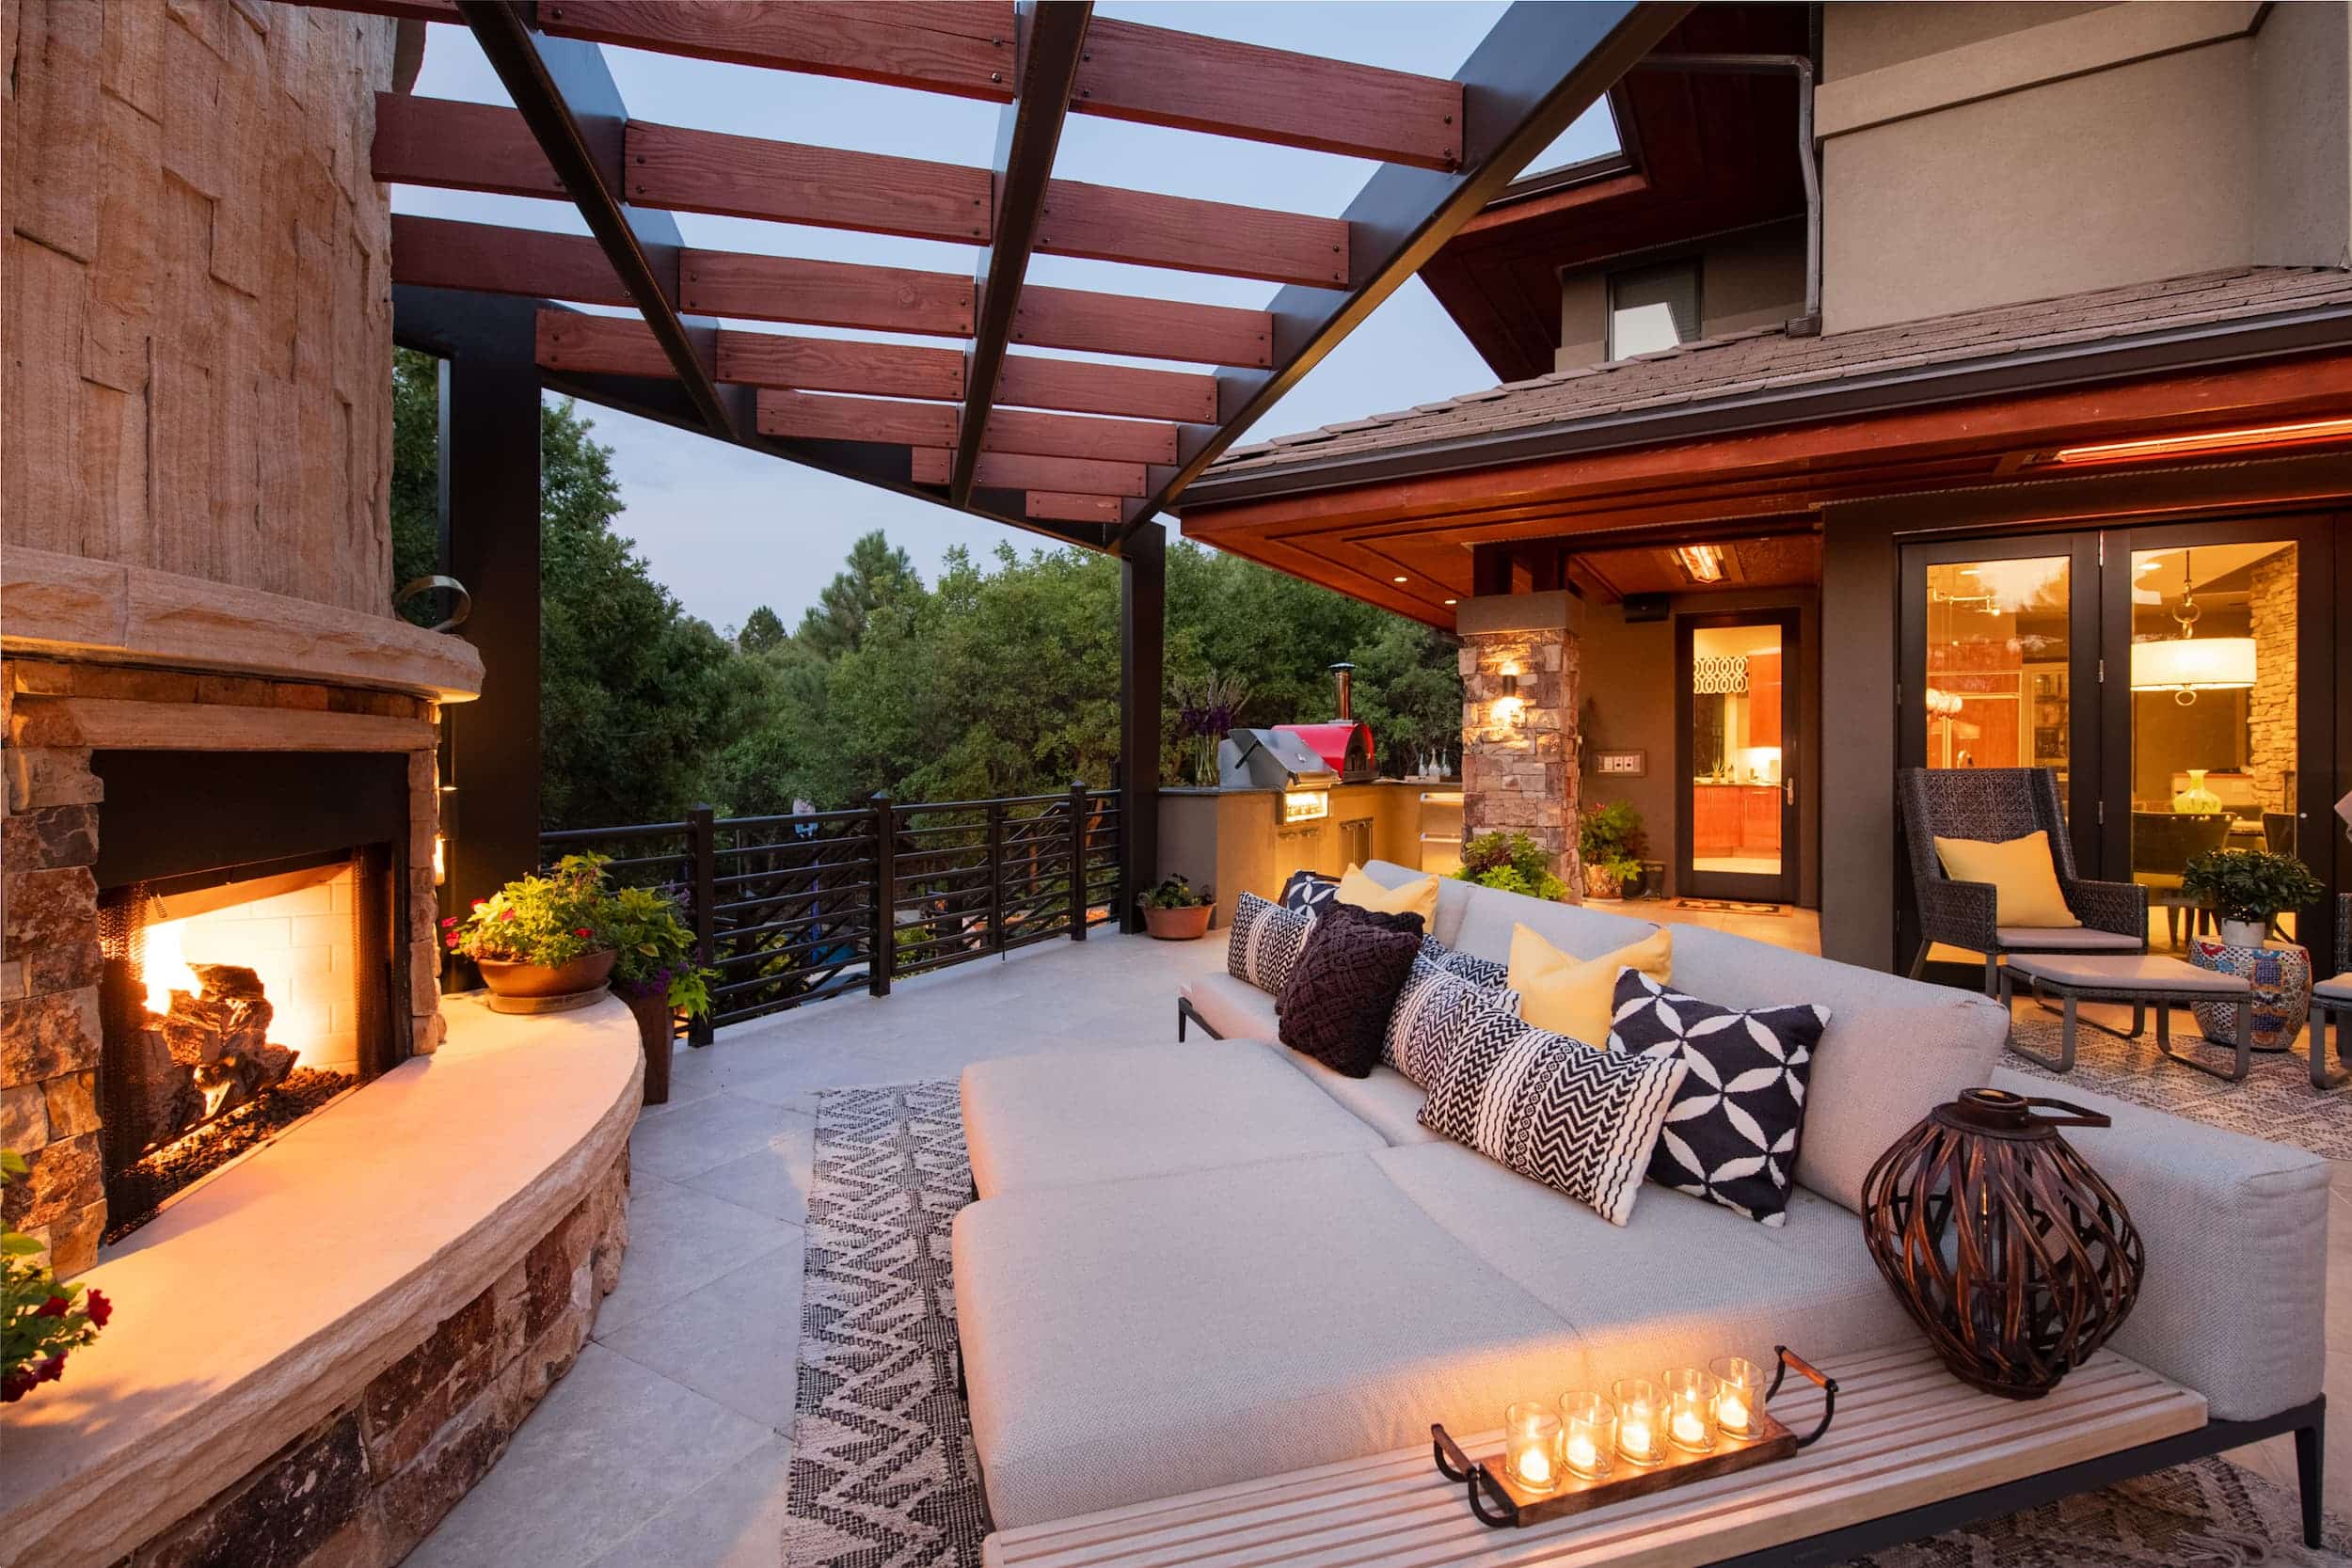 An outdoor living area with a fireplace.